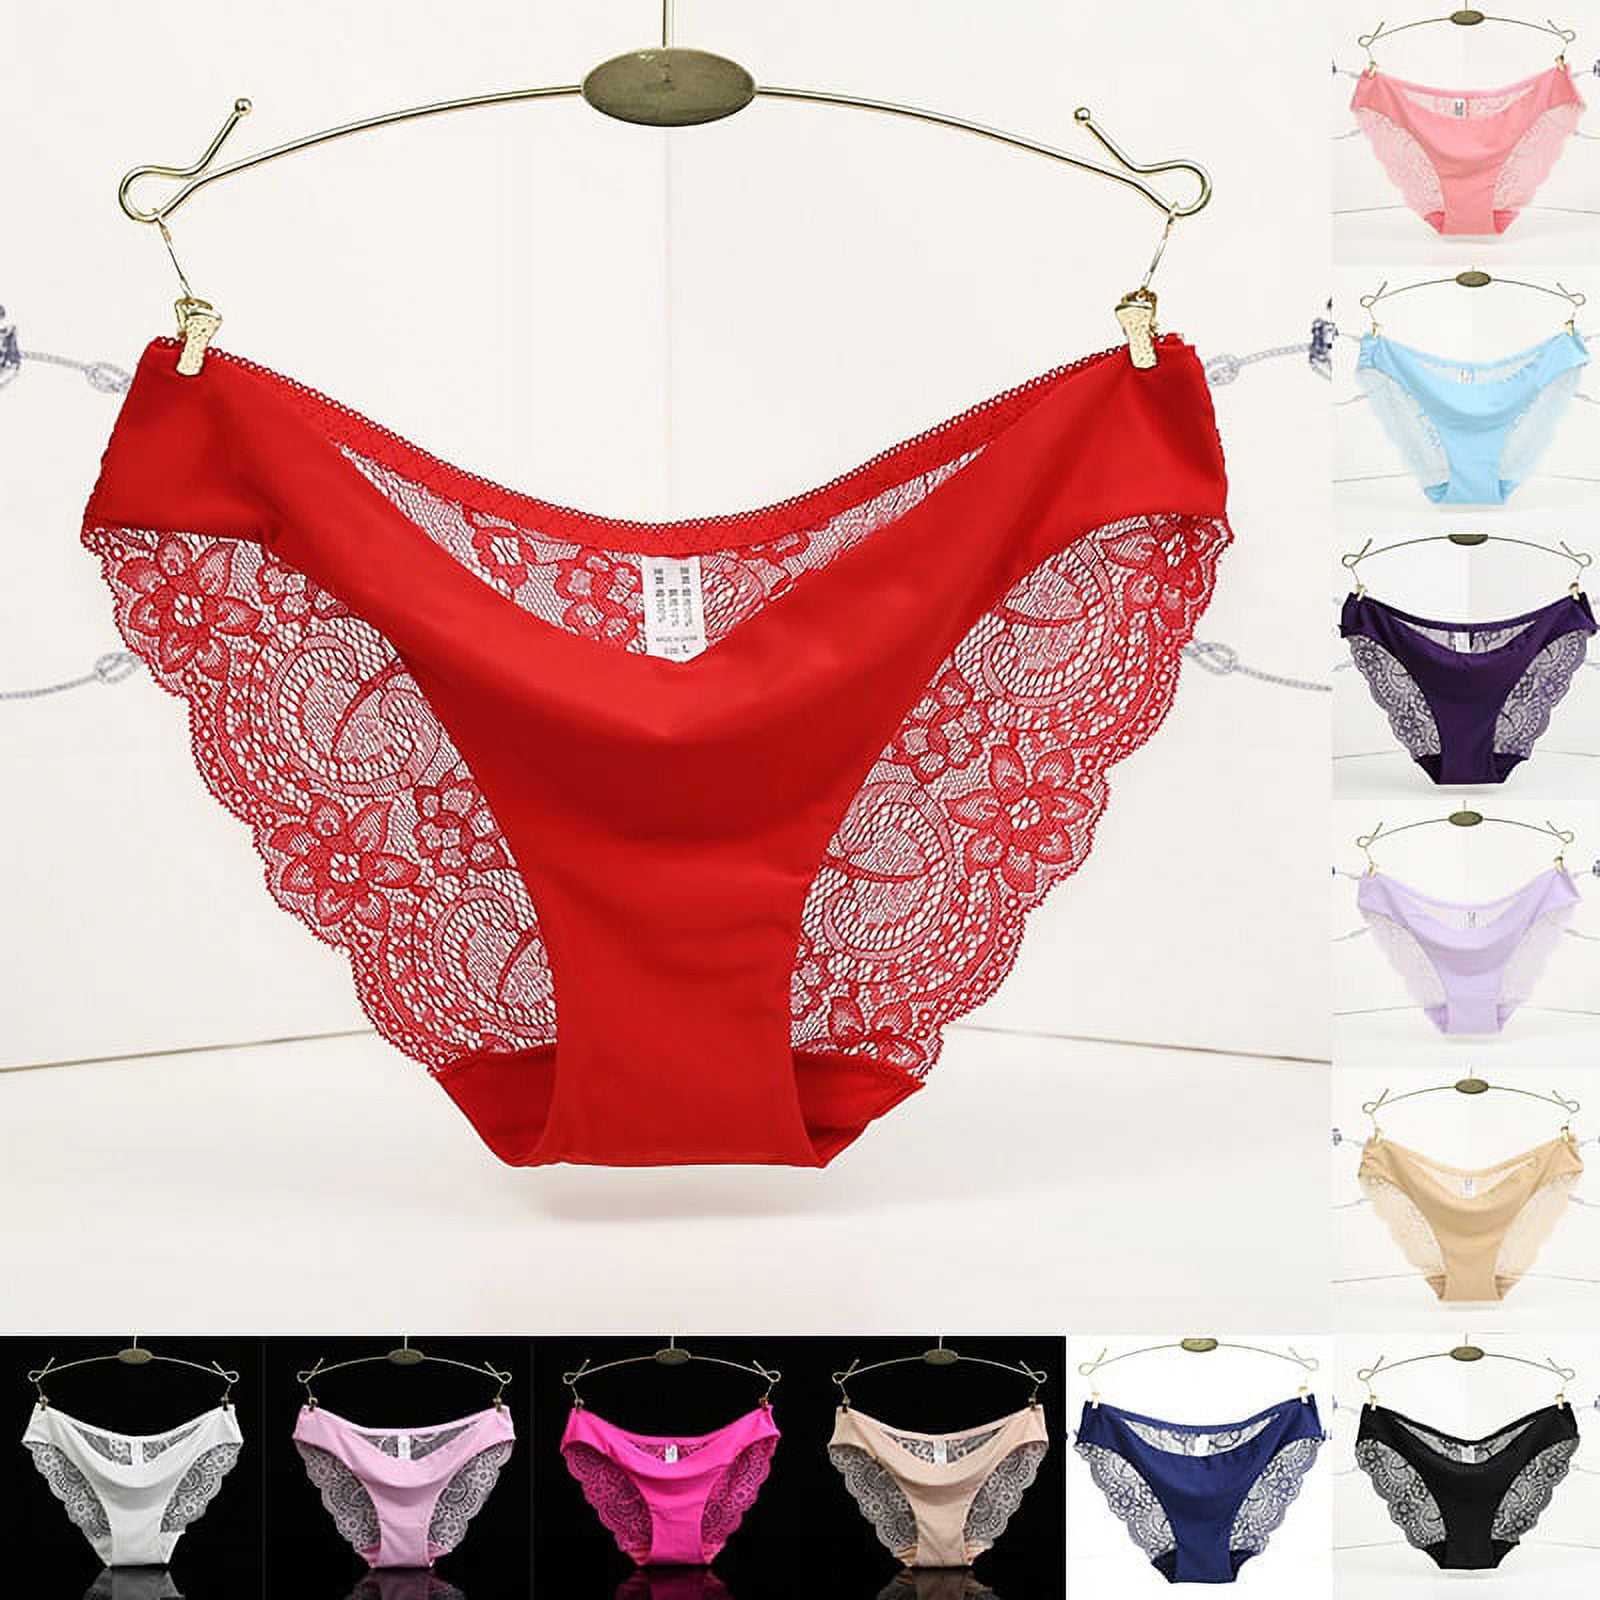 Women's Sexy Lace Panties Seamless Cotton Breathable Panty Hollow Briefs  Girl Underwear Red XL 